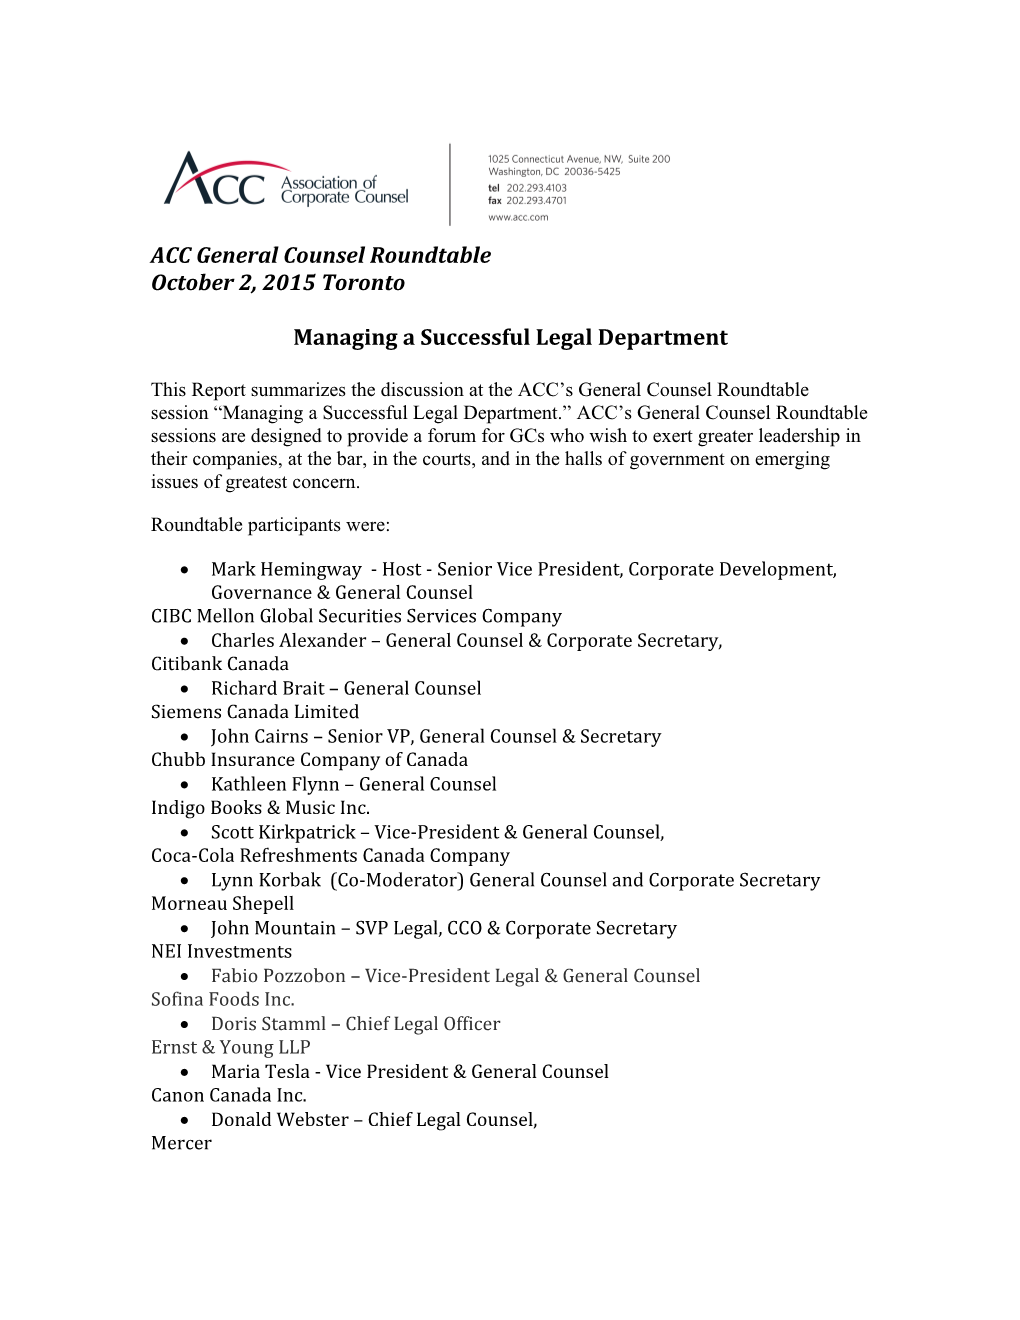 ACC General Counsel Roundtable